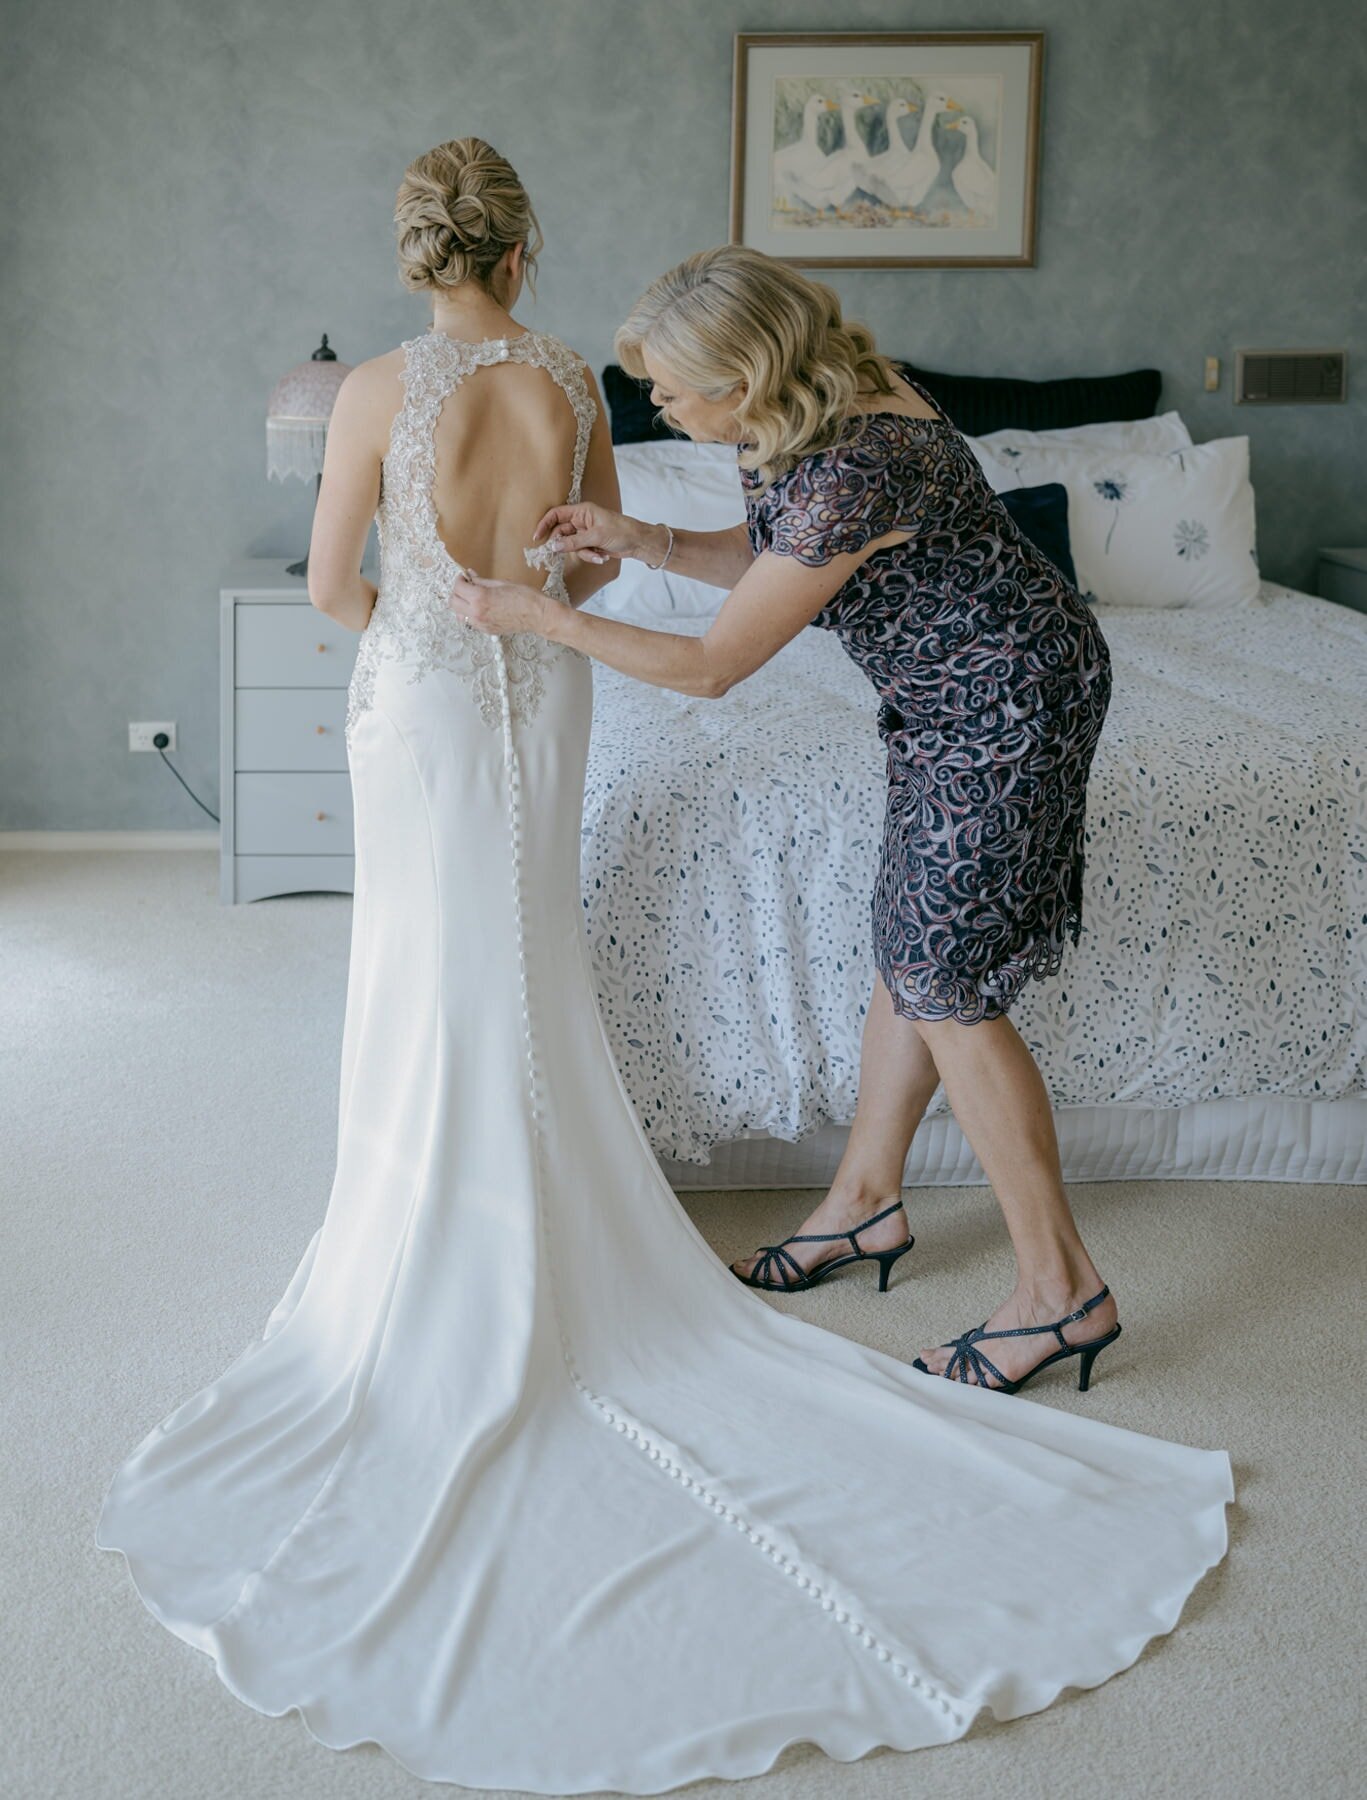 Stones of the Yarra Valley wedding - Serenity Photography 32